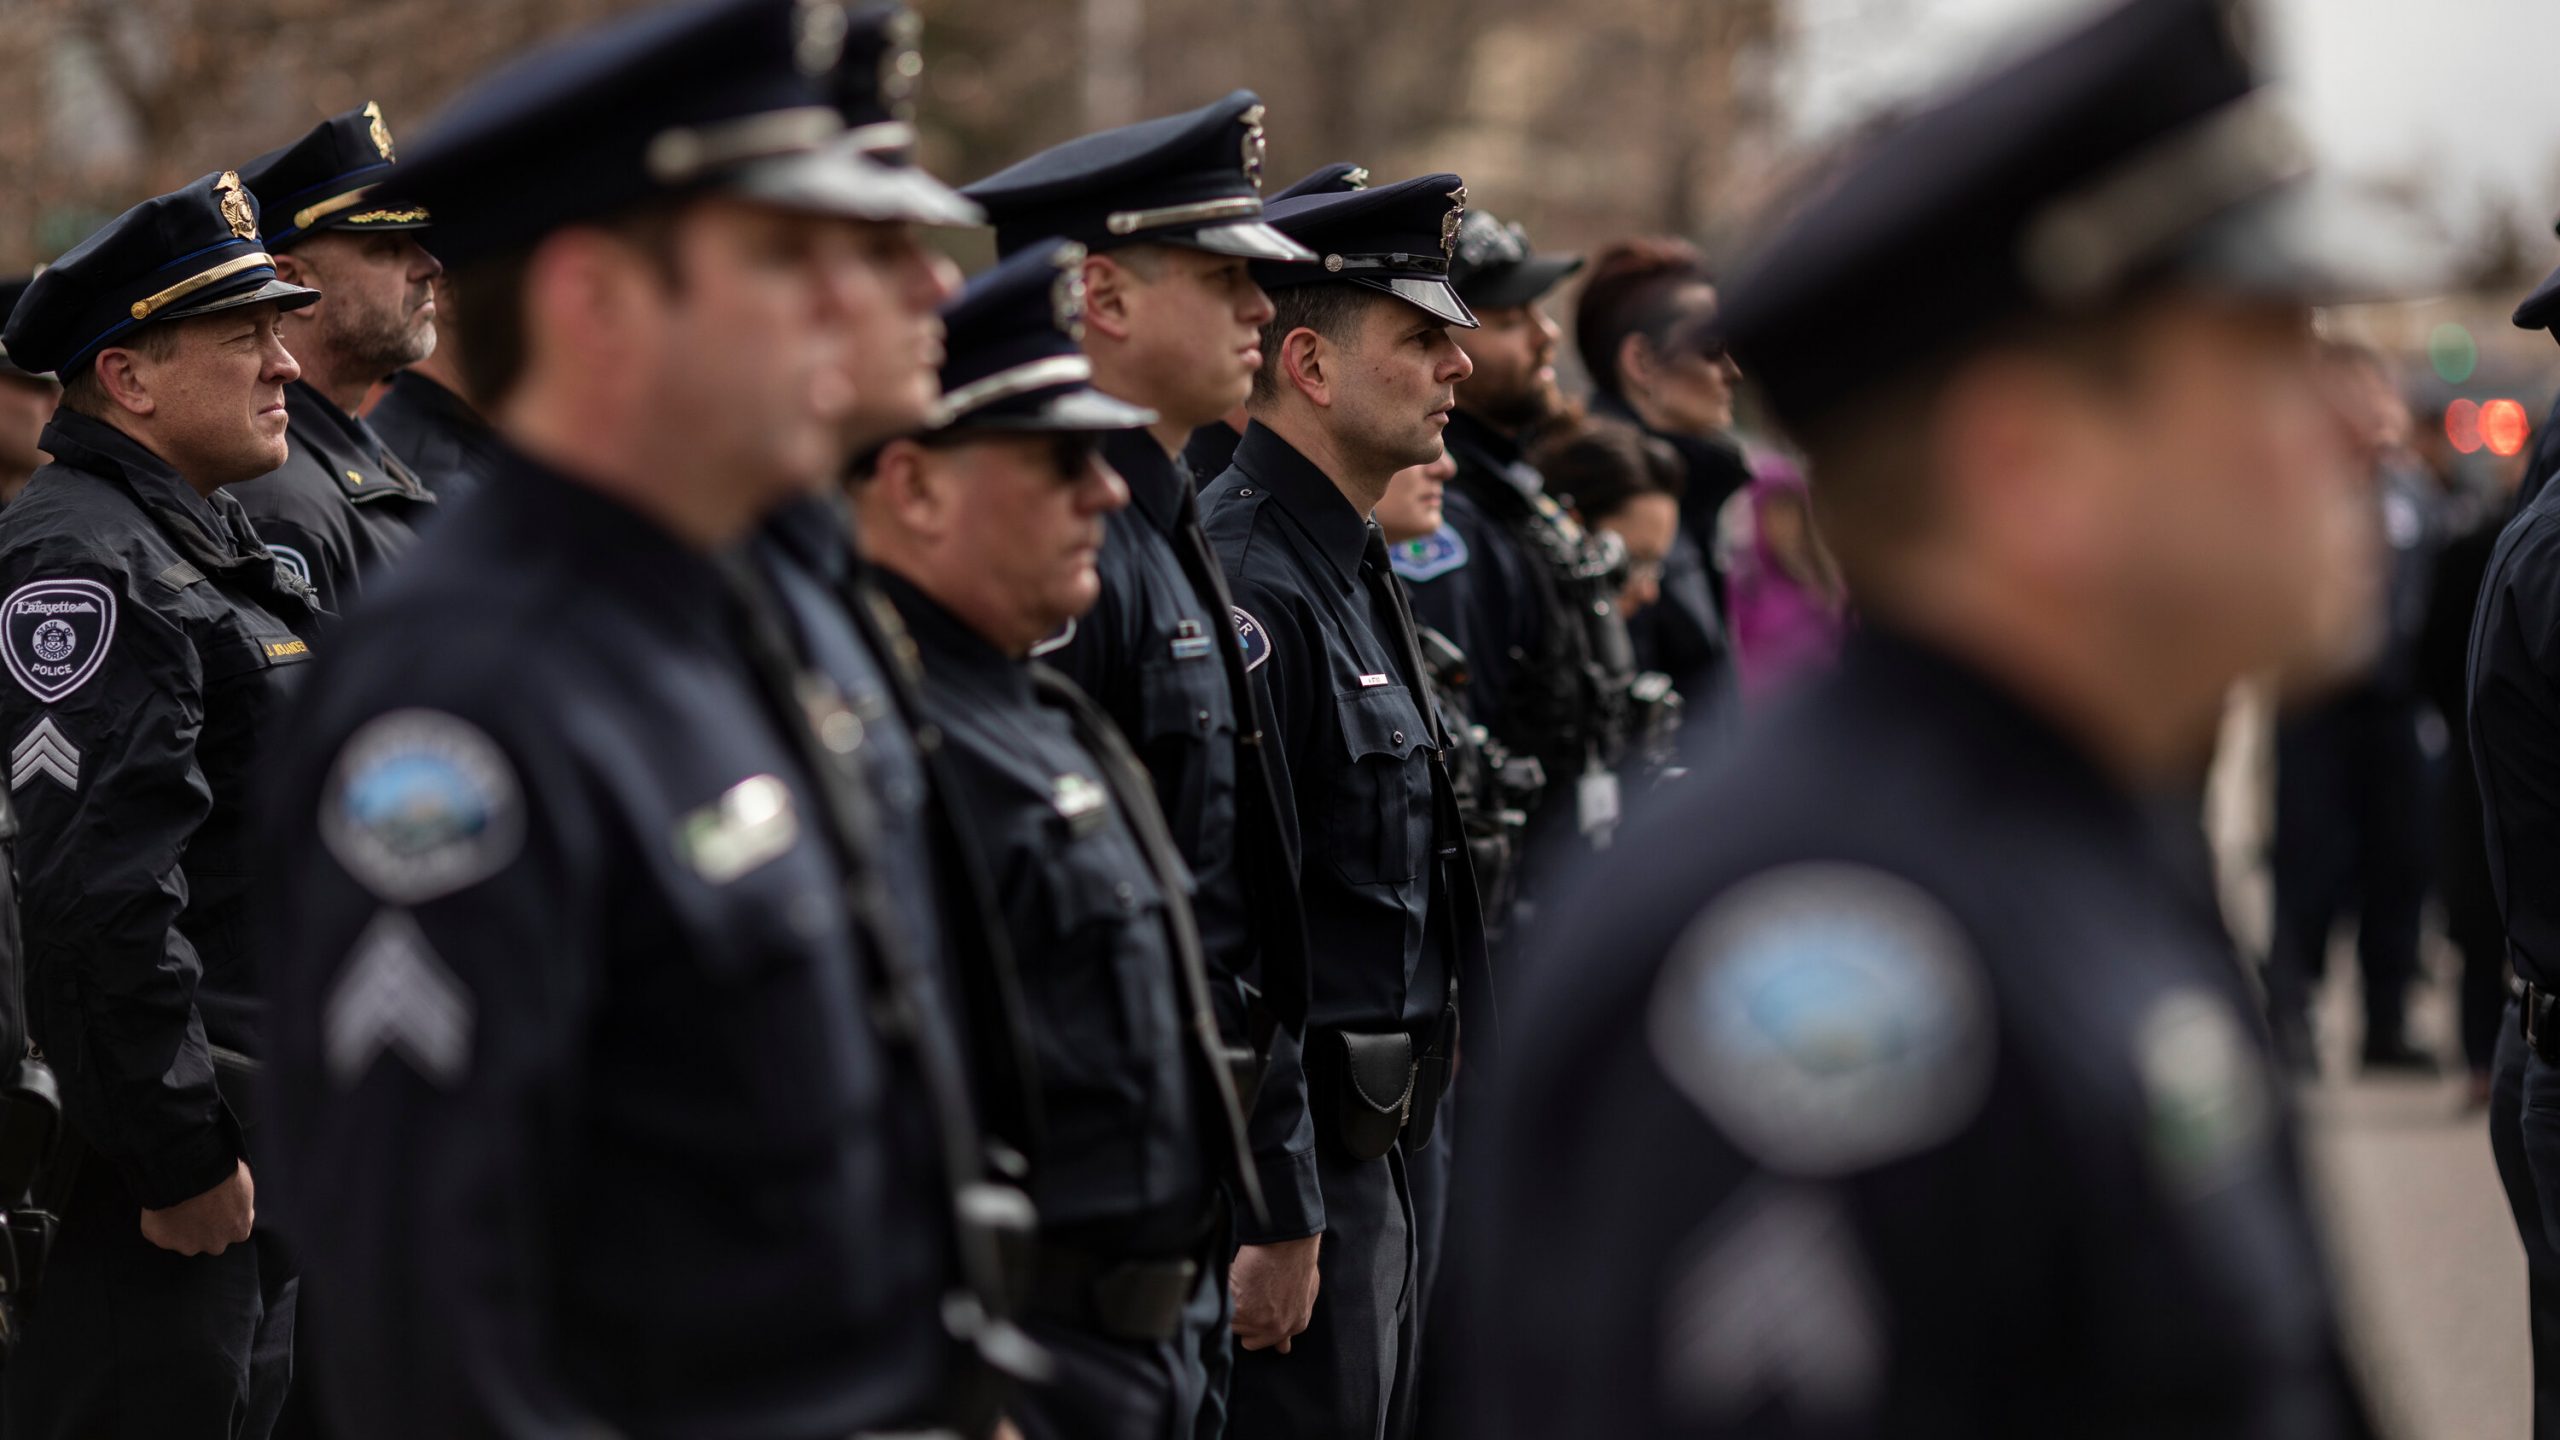 Several lines of police officers stand outdoors.